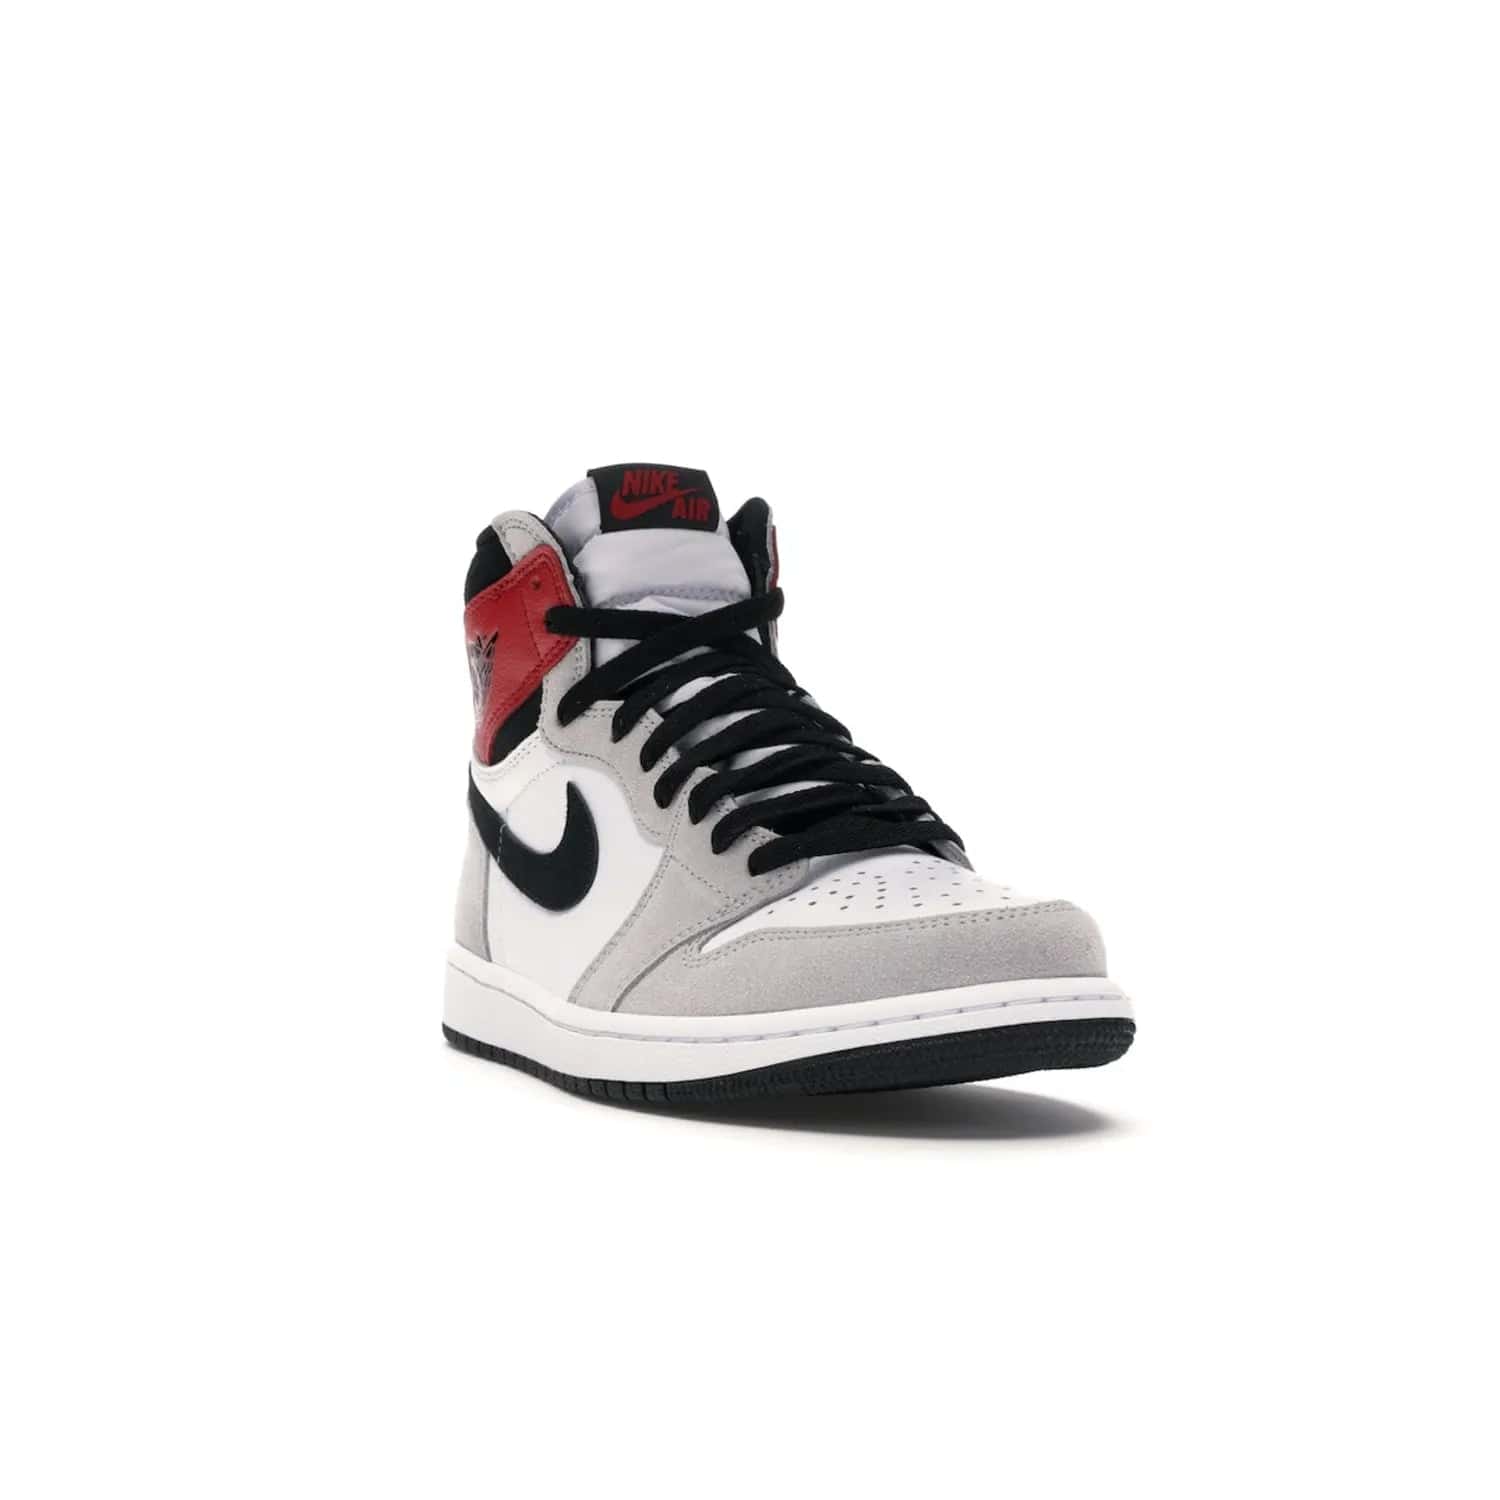 Jordan 1 Retro High Light Smoke Grey - Image 7 - Only at www.BallersClubKickz.com - Comfortable and stylish, Jordan 1 Retro High Light Smoke Grey offers a unique spin on a classic design. White leather, grey suede, red leather and black details are set on a white midsole and black outsole. Get the sneaker released in July 2020 and add a twist to your wardrobe.